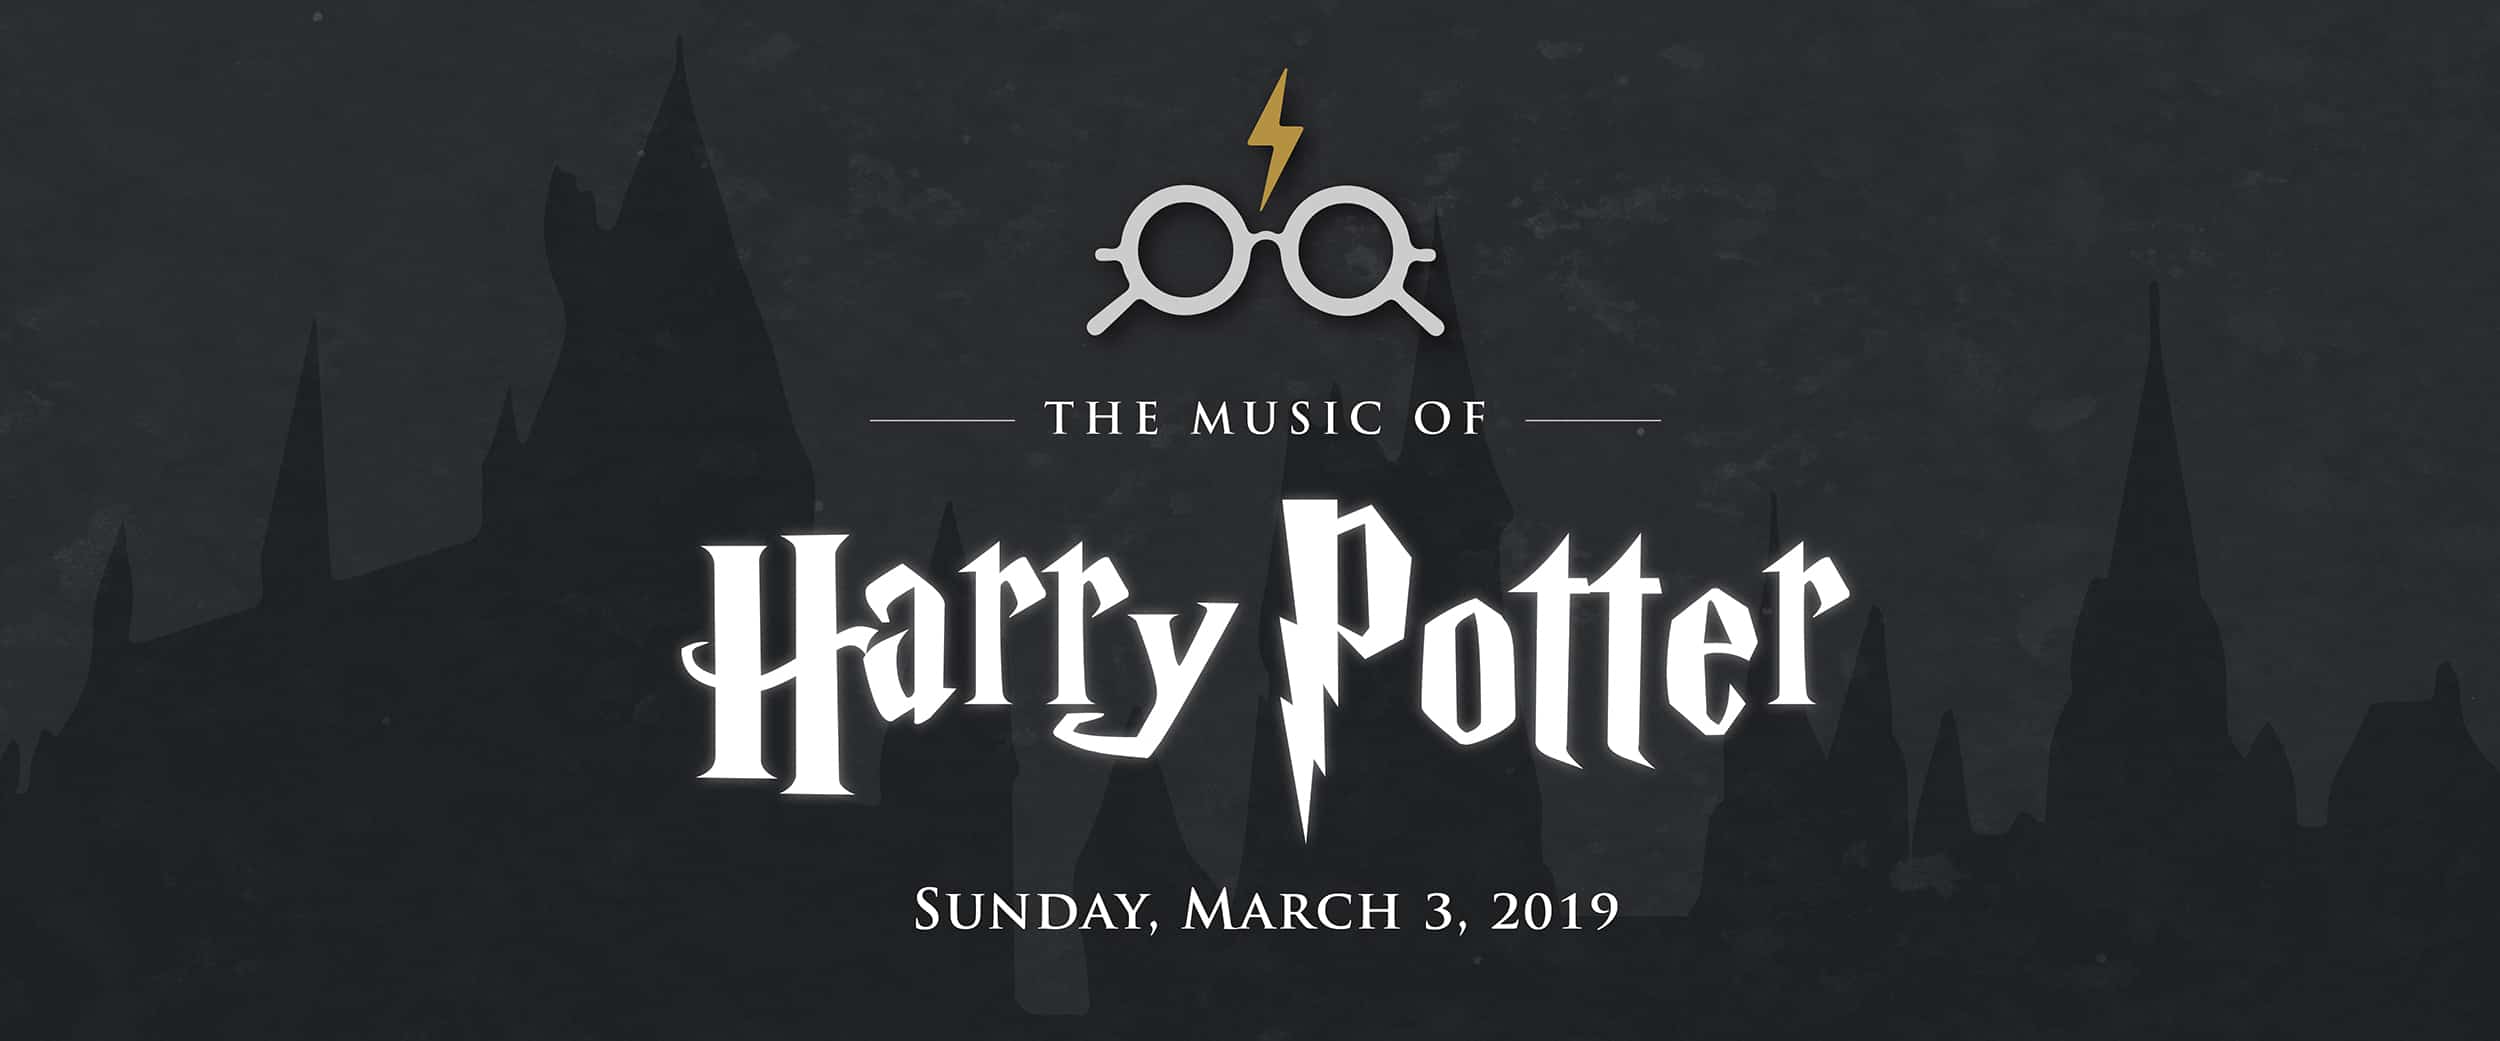 Harry Potter 2 Logo - The Music of Harry Potter at The Michigan Theatre. Sunday, March 3